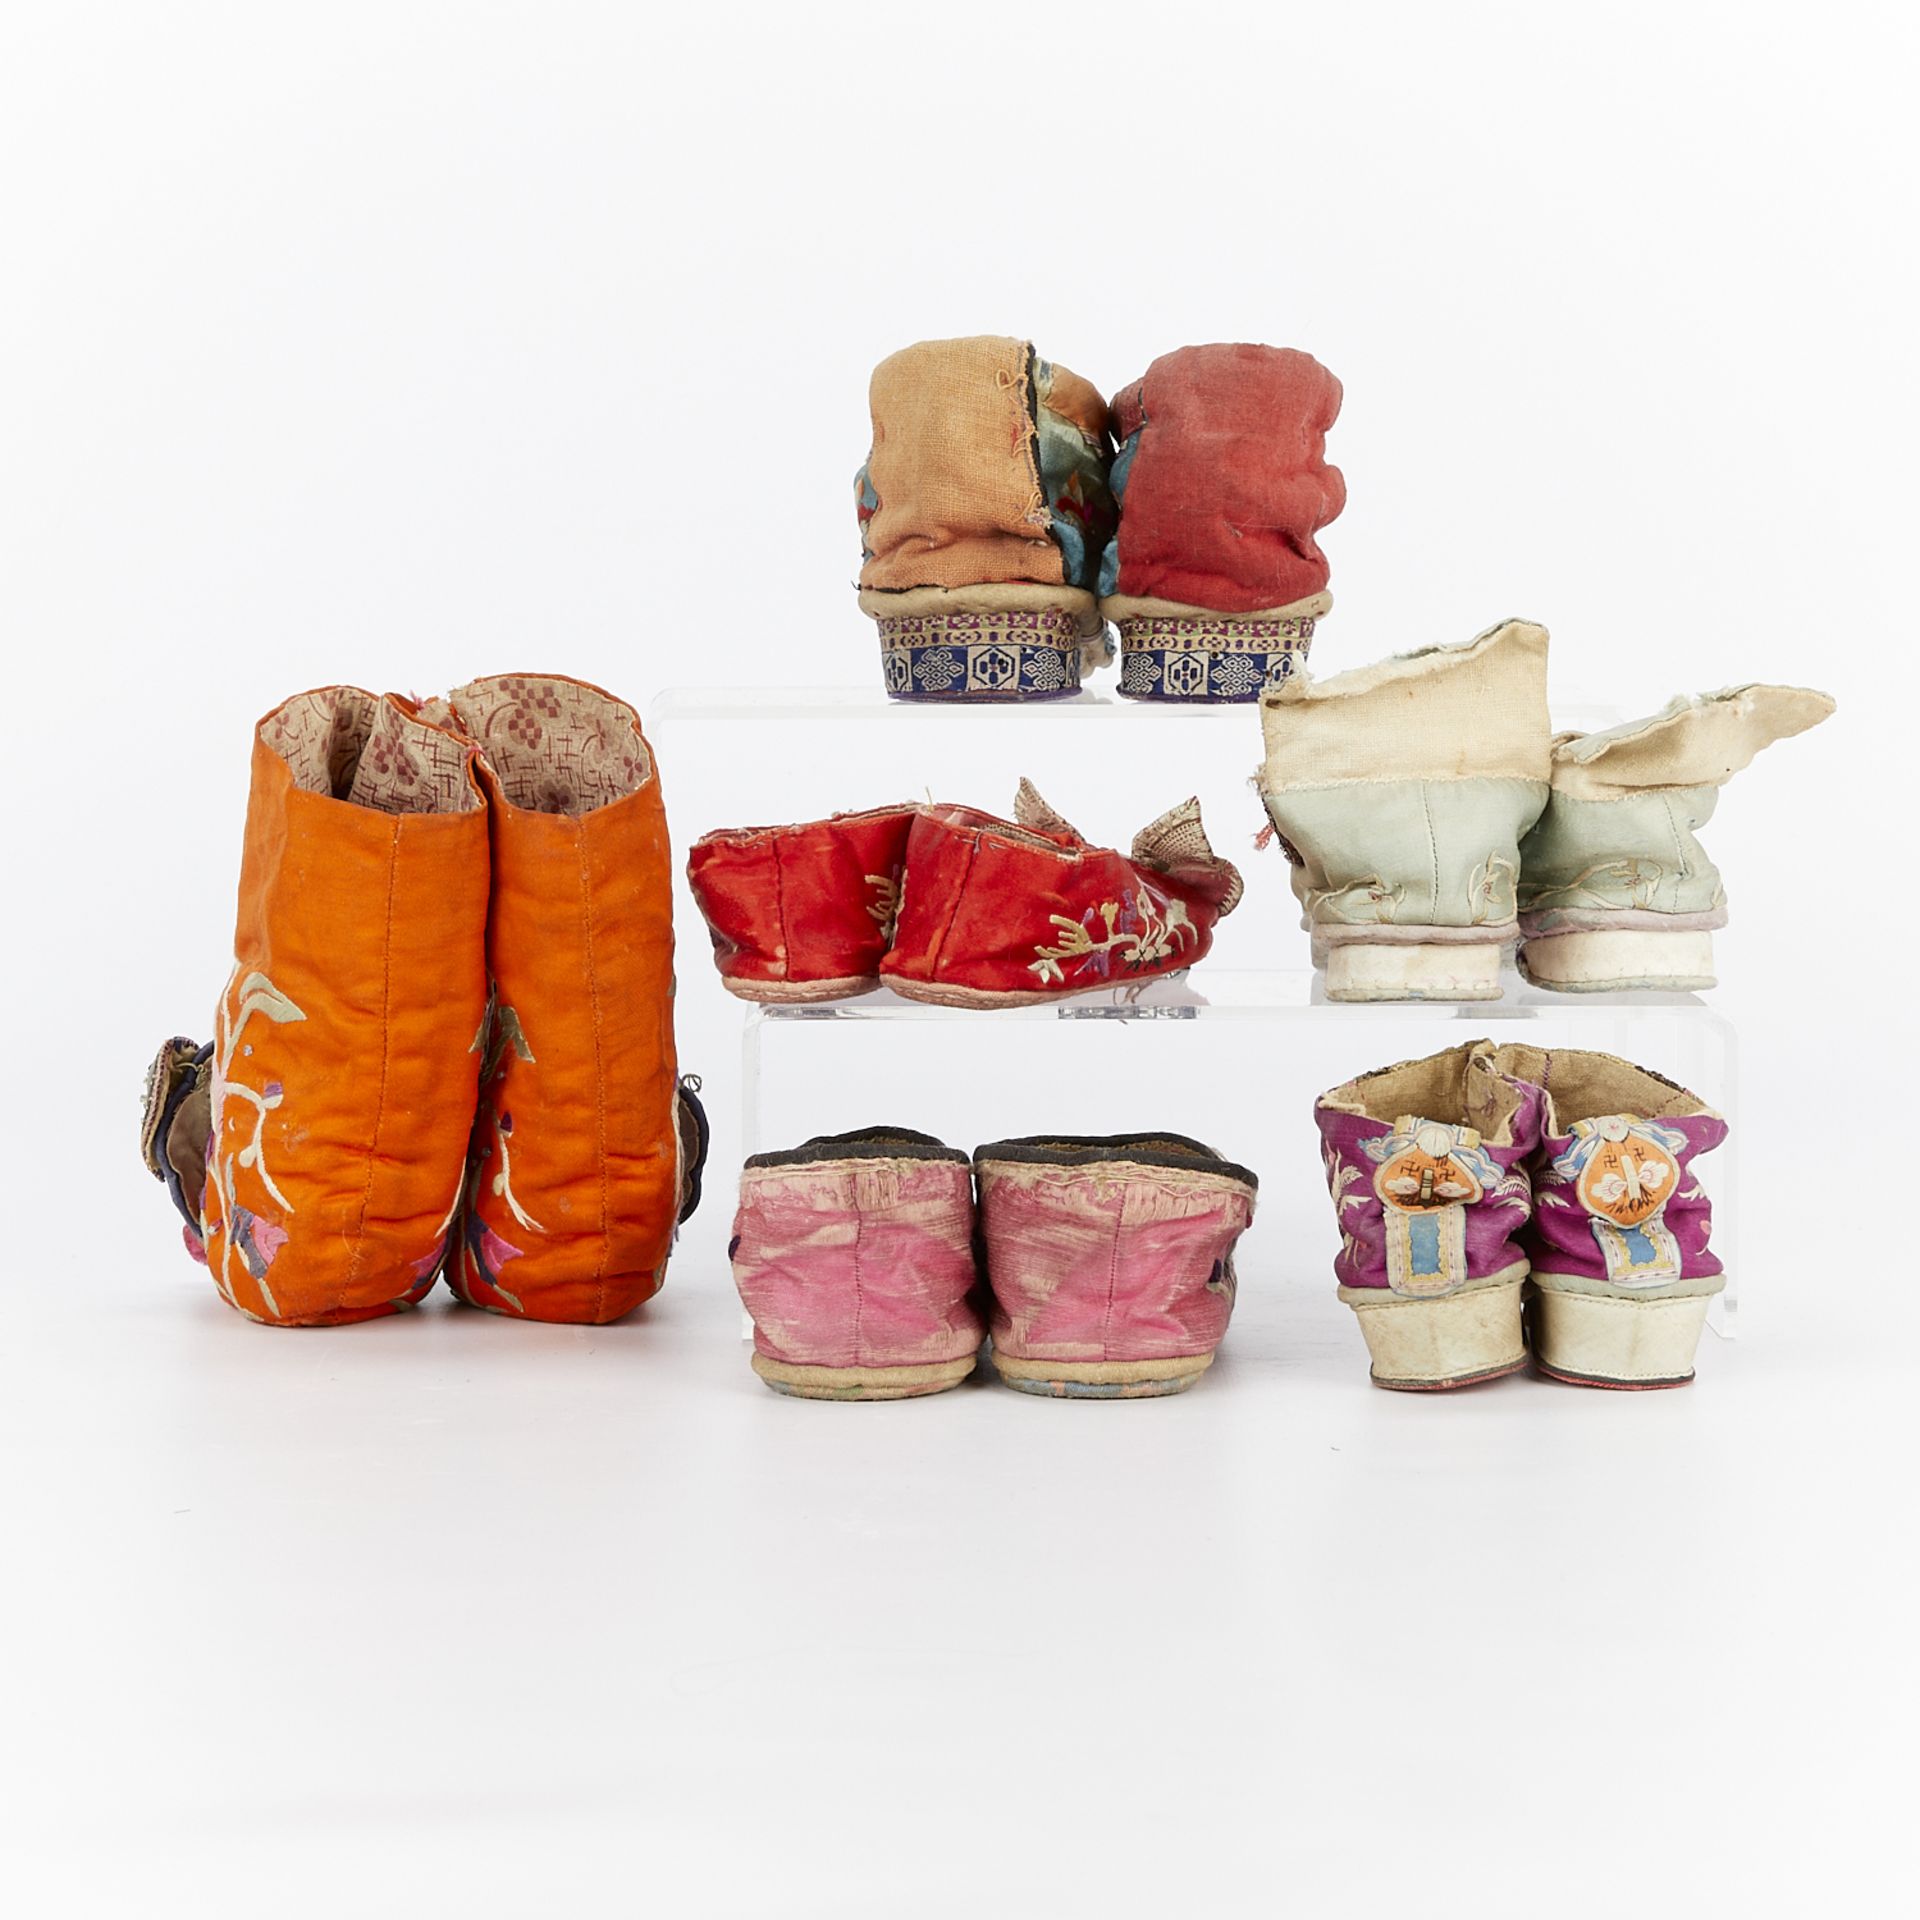 6 Pairs of Chinese Silk Foot Binding Shoes - Image 4 of 12